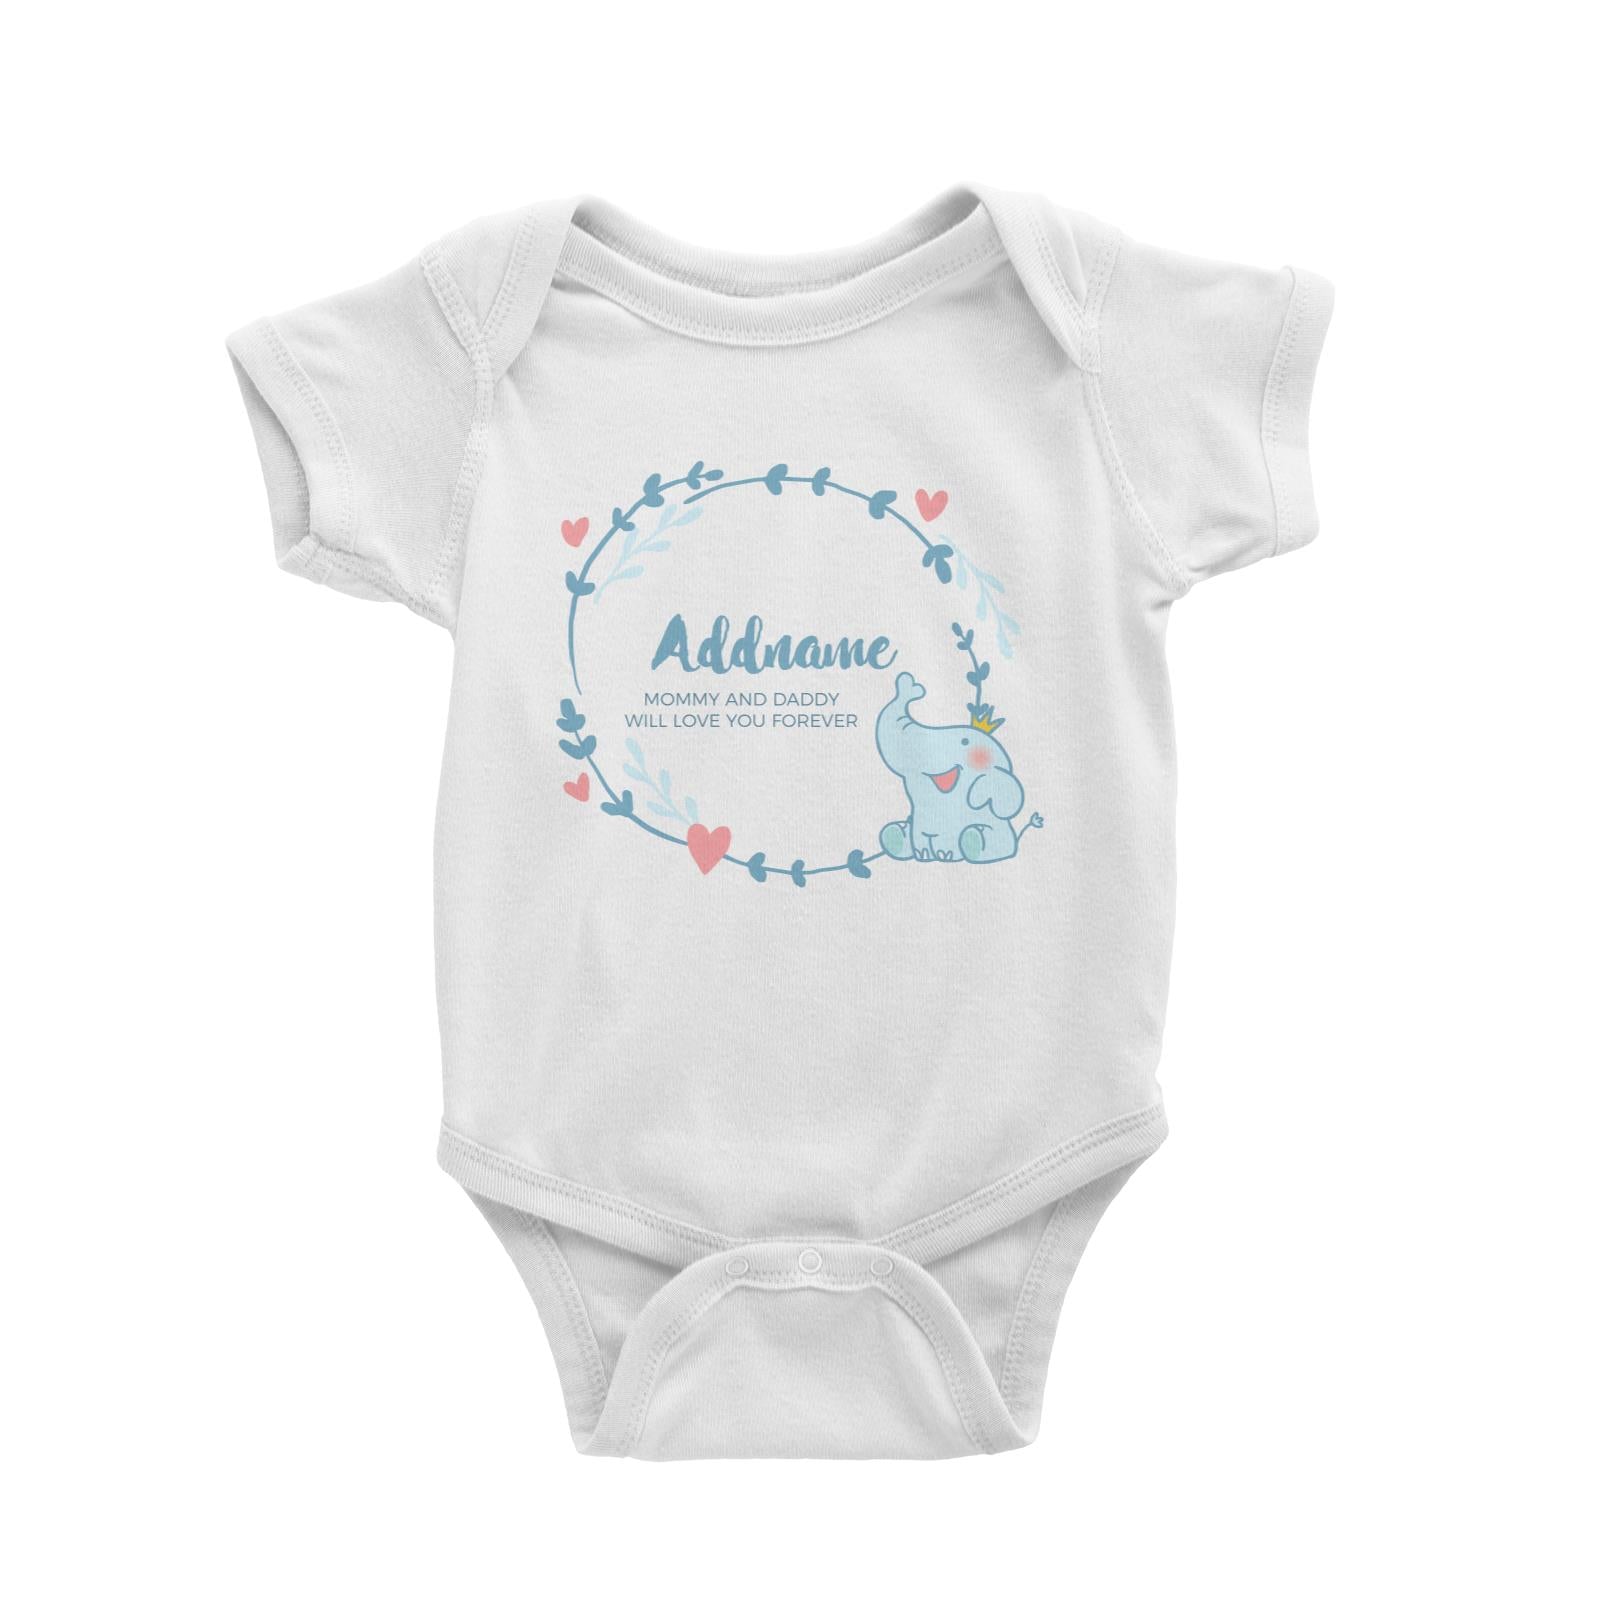 Cute Baby Blue Elephant Prince Personalizable with Name and Text Baby Romper